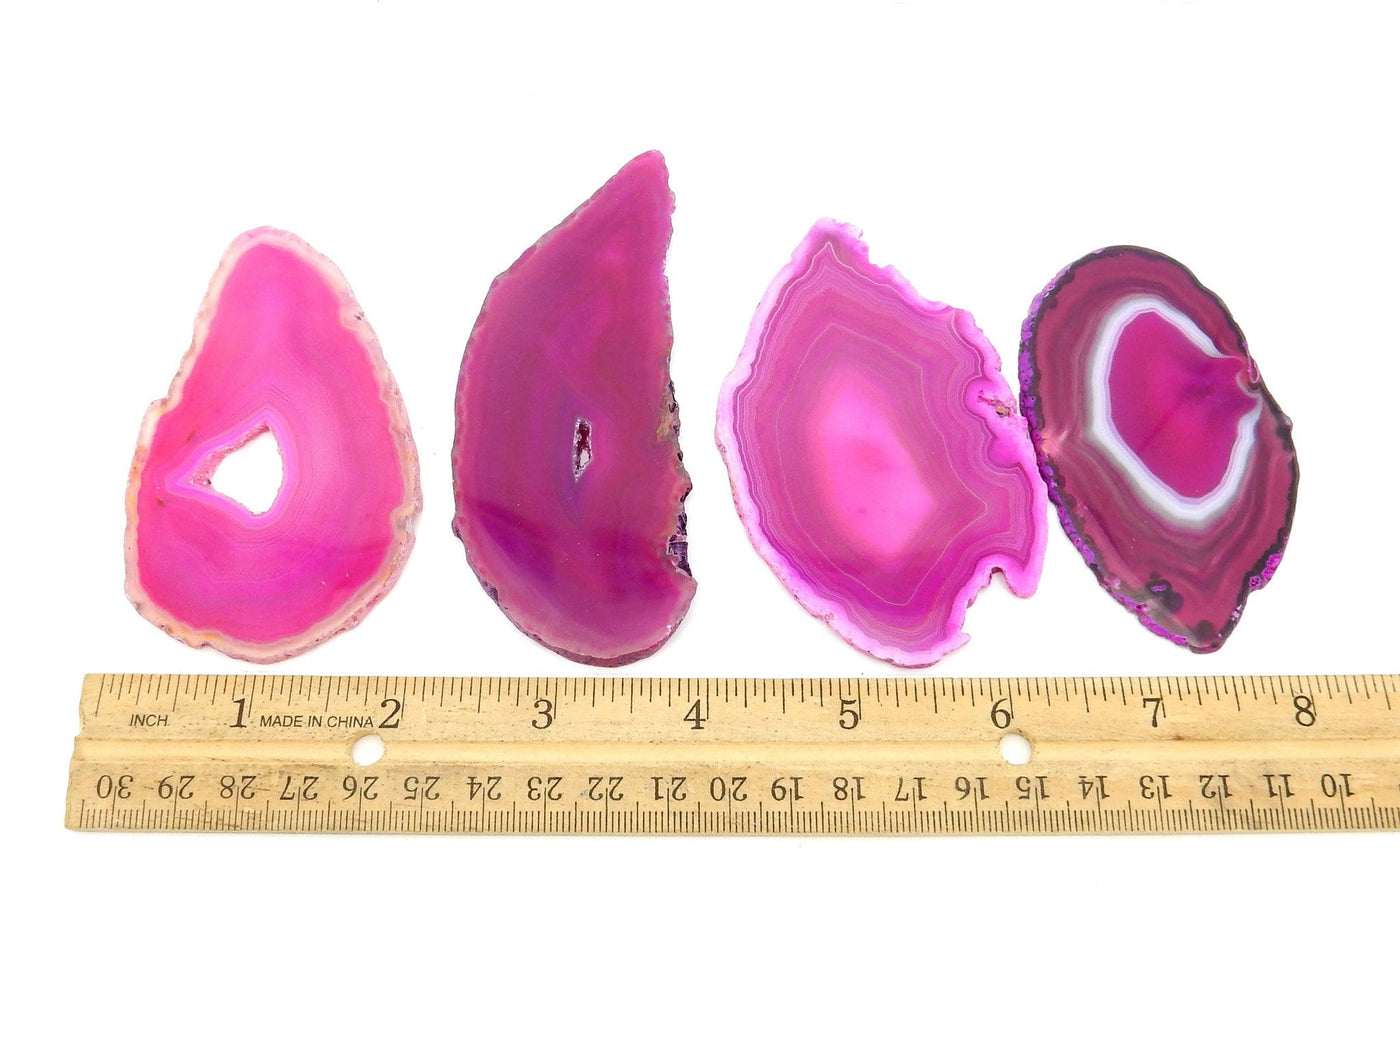 pink agate slices next to a ruler